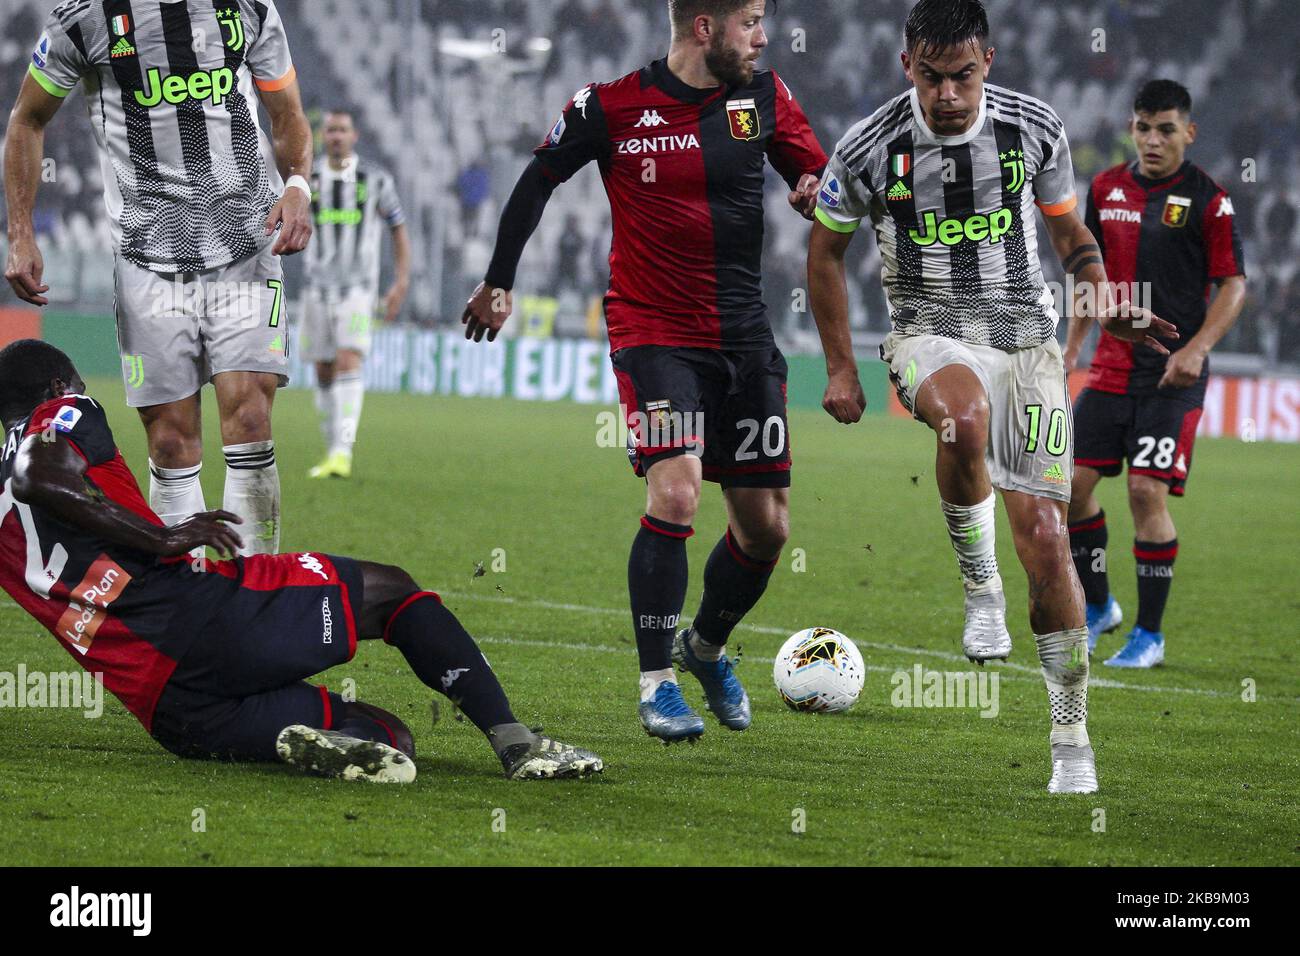 Genoa defender Cristian Zapata (2) tackles Juventus forward Paulo Dybala (10) during the Serie A football match n.10 JUVENTUS - GENOA on October 30, 2019 at the Allianz Stadium in Turin, Piedmont, Italy. Final result: Juventus-Genoa 2-1. (Photo by Matteo Bottanelli/NurPhoto) Stock Photo